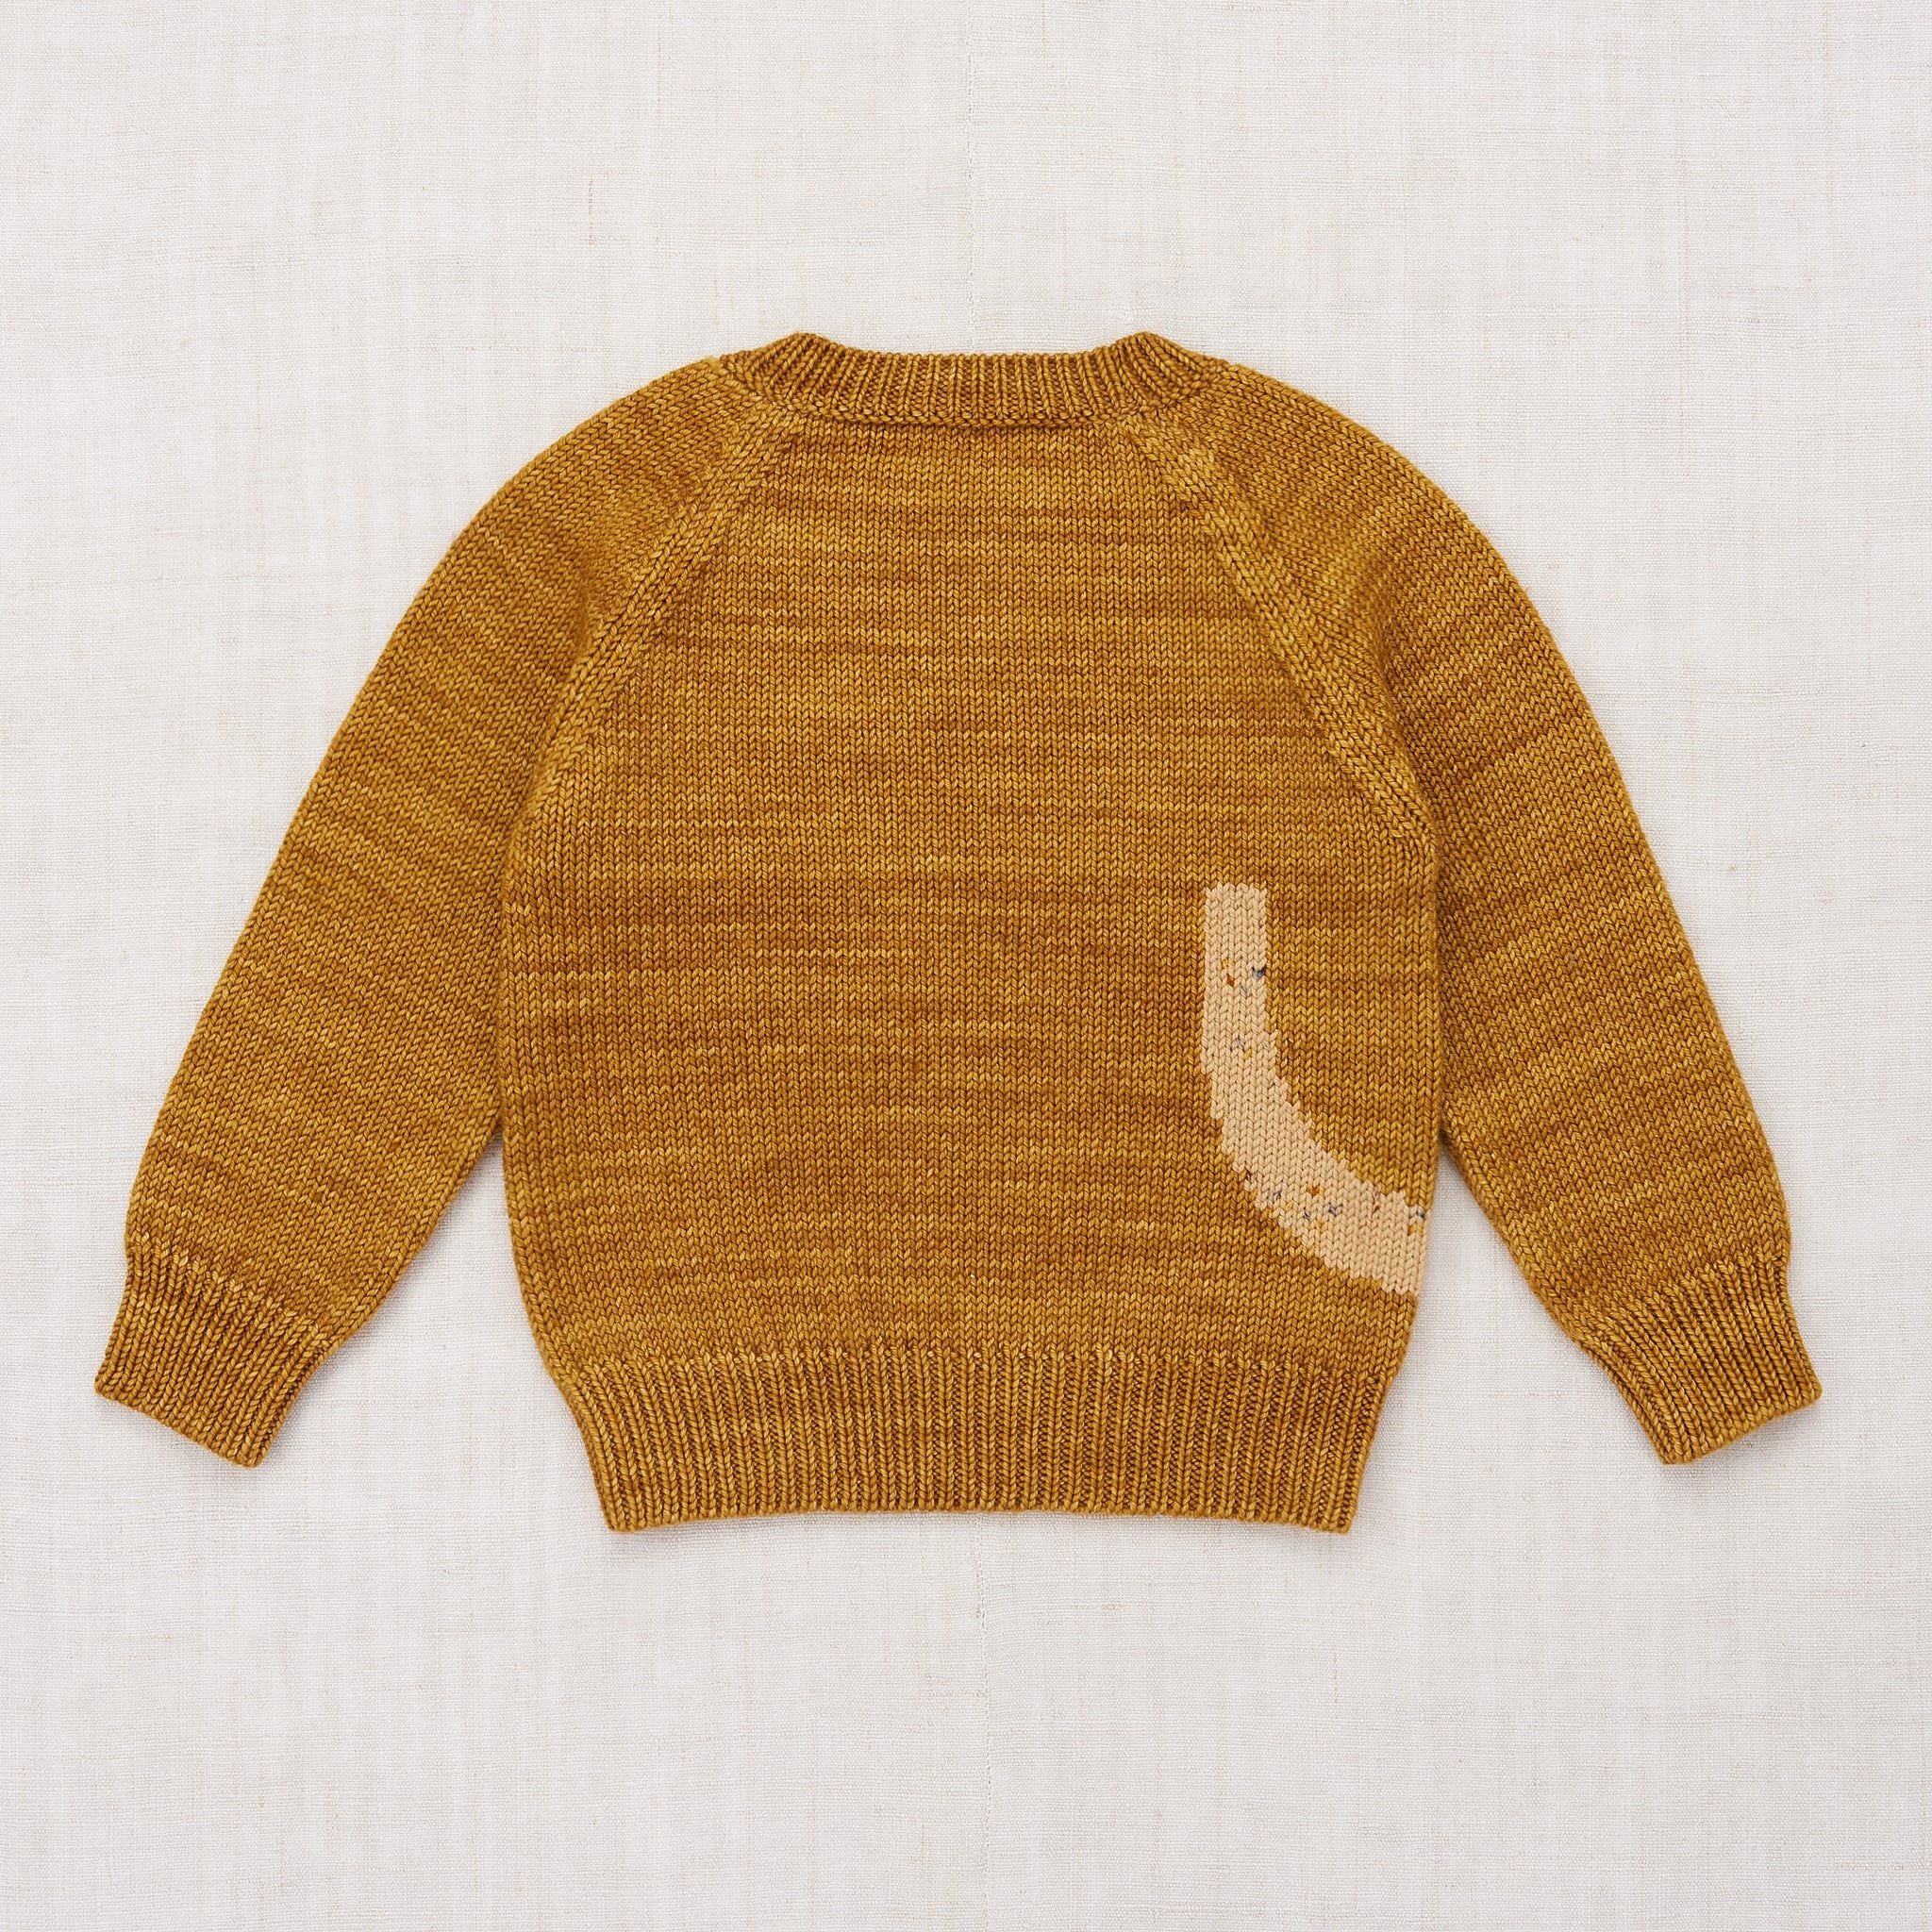 Misha and Puff, Cat Sweater in Spun Gold – CouCou